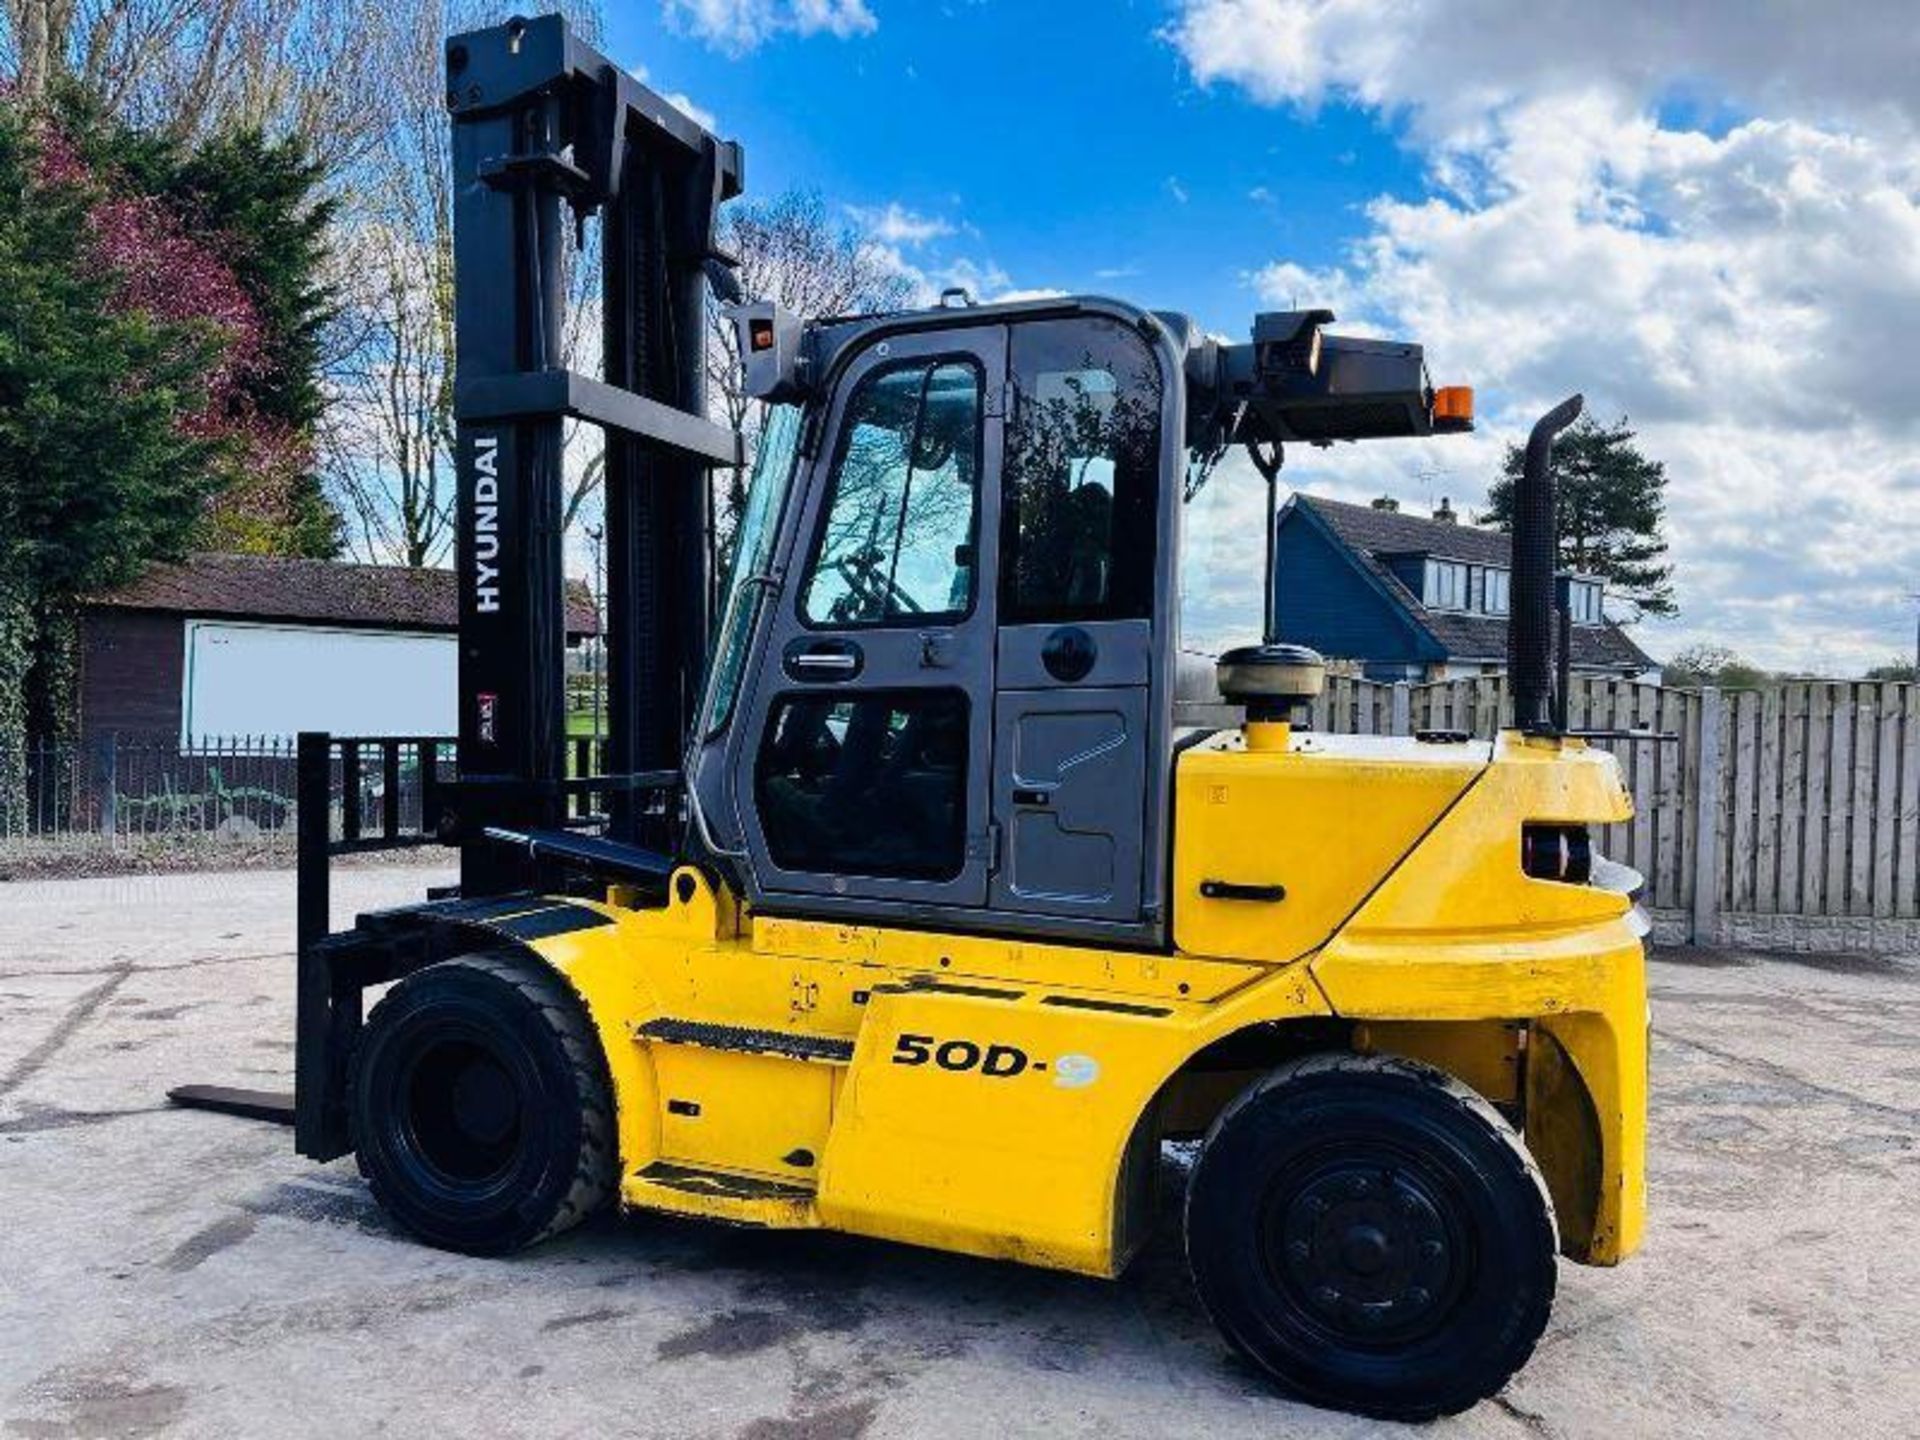 HYUNDAI 50D-9 DIESEL FORKLIFT *YEAR 2016, 5 TON LIFT* C/W SIDE SHIFT - Image 2 of 17